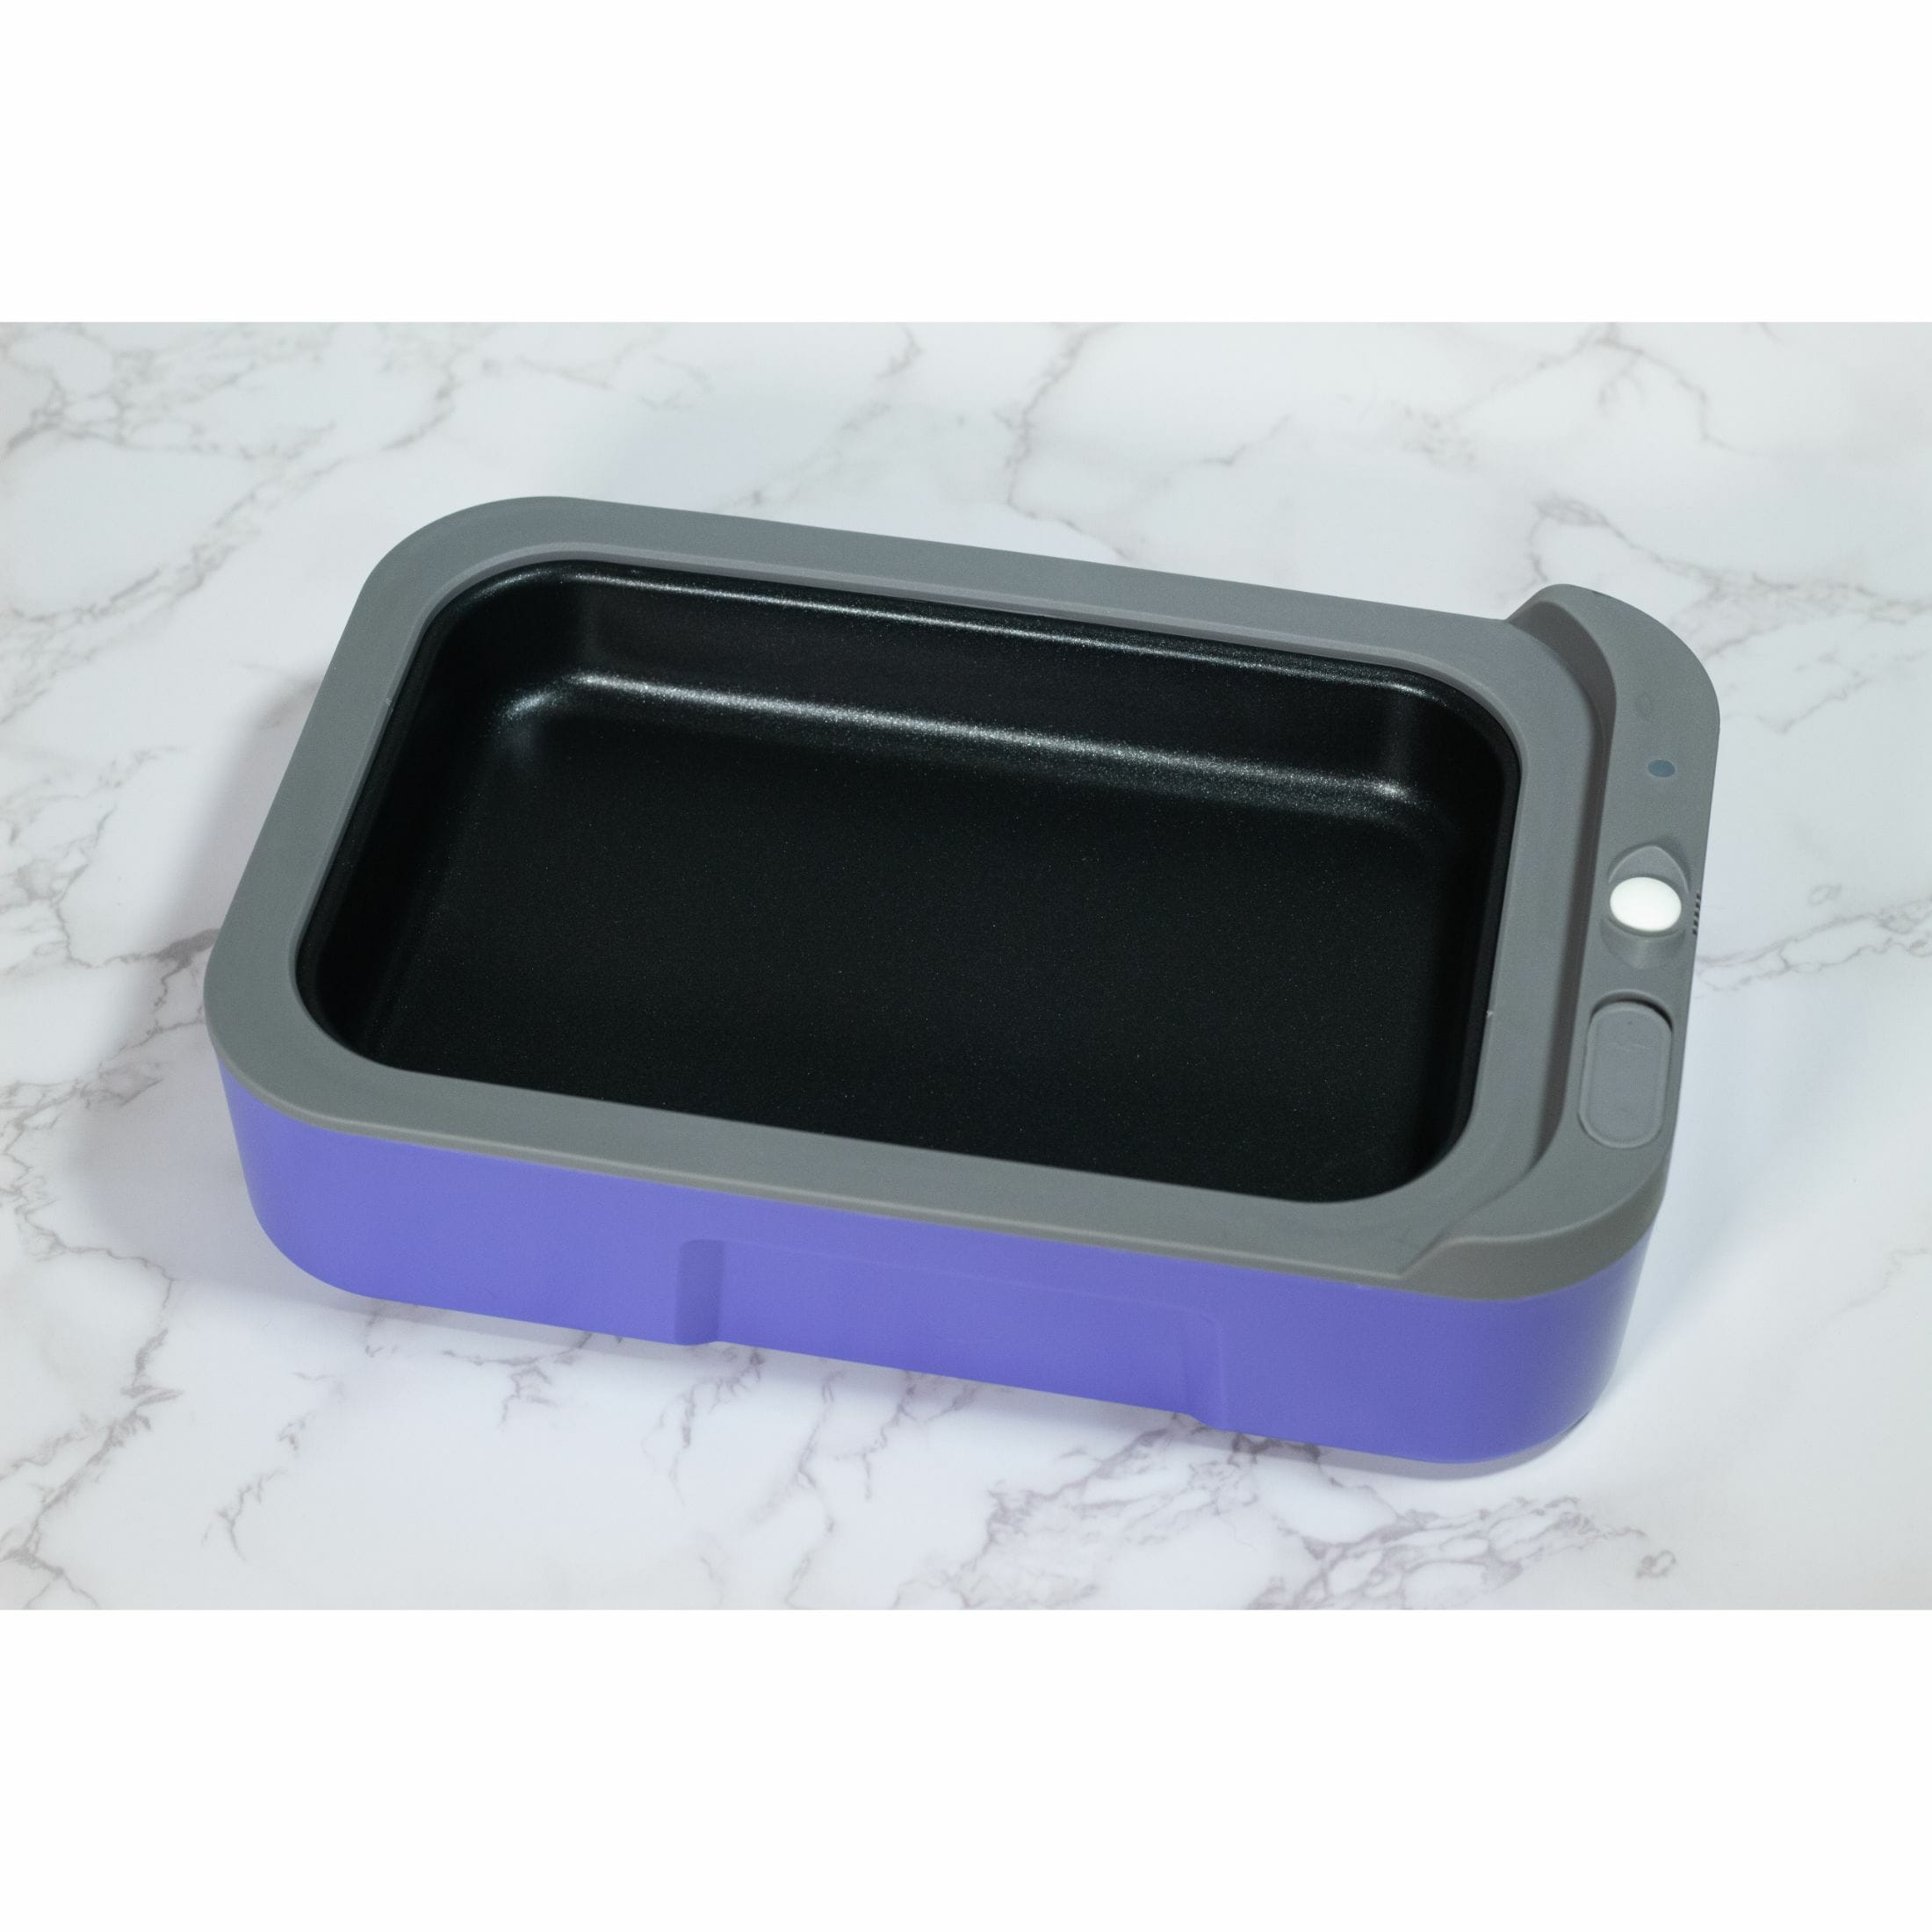 Hot Bento Food Container Internal Battery Powered Self-Heating